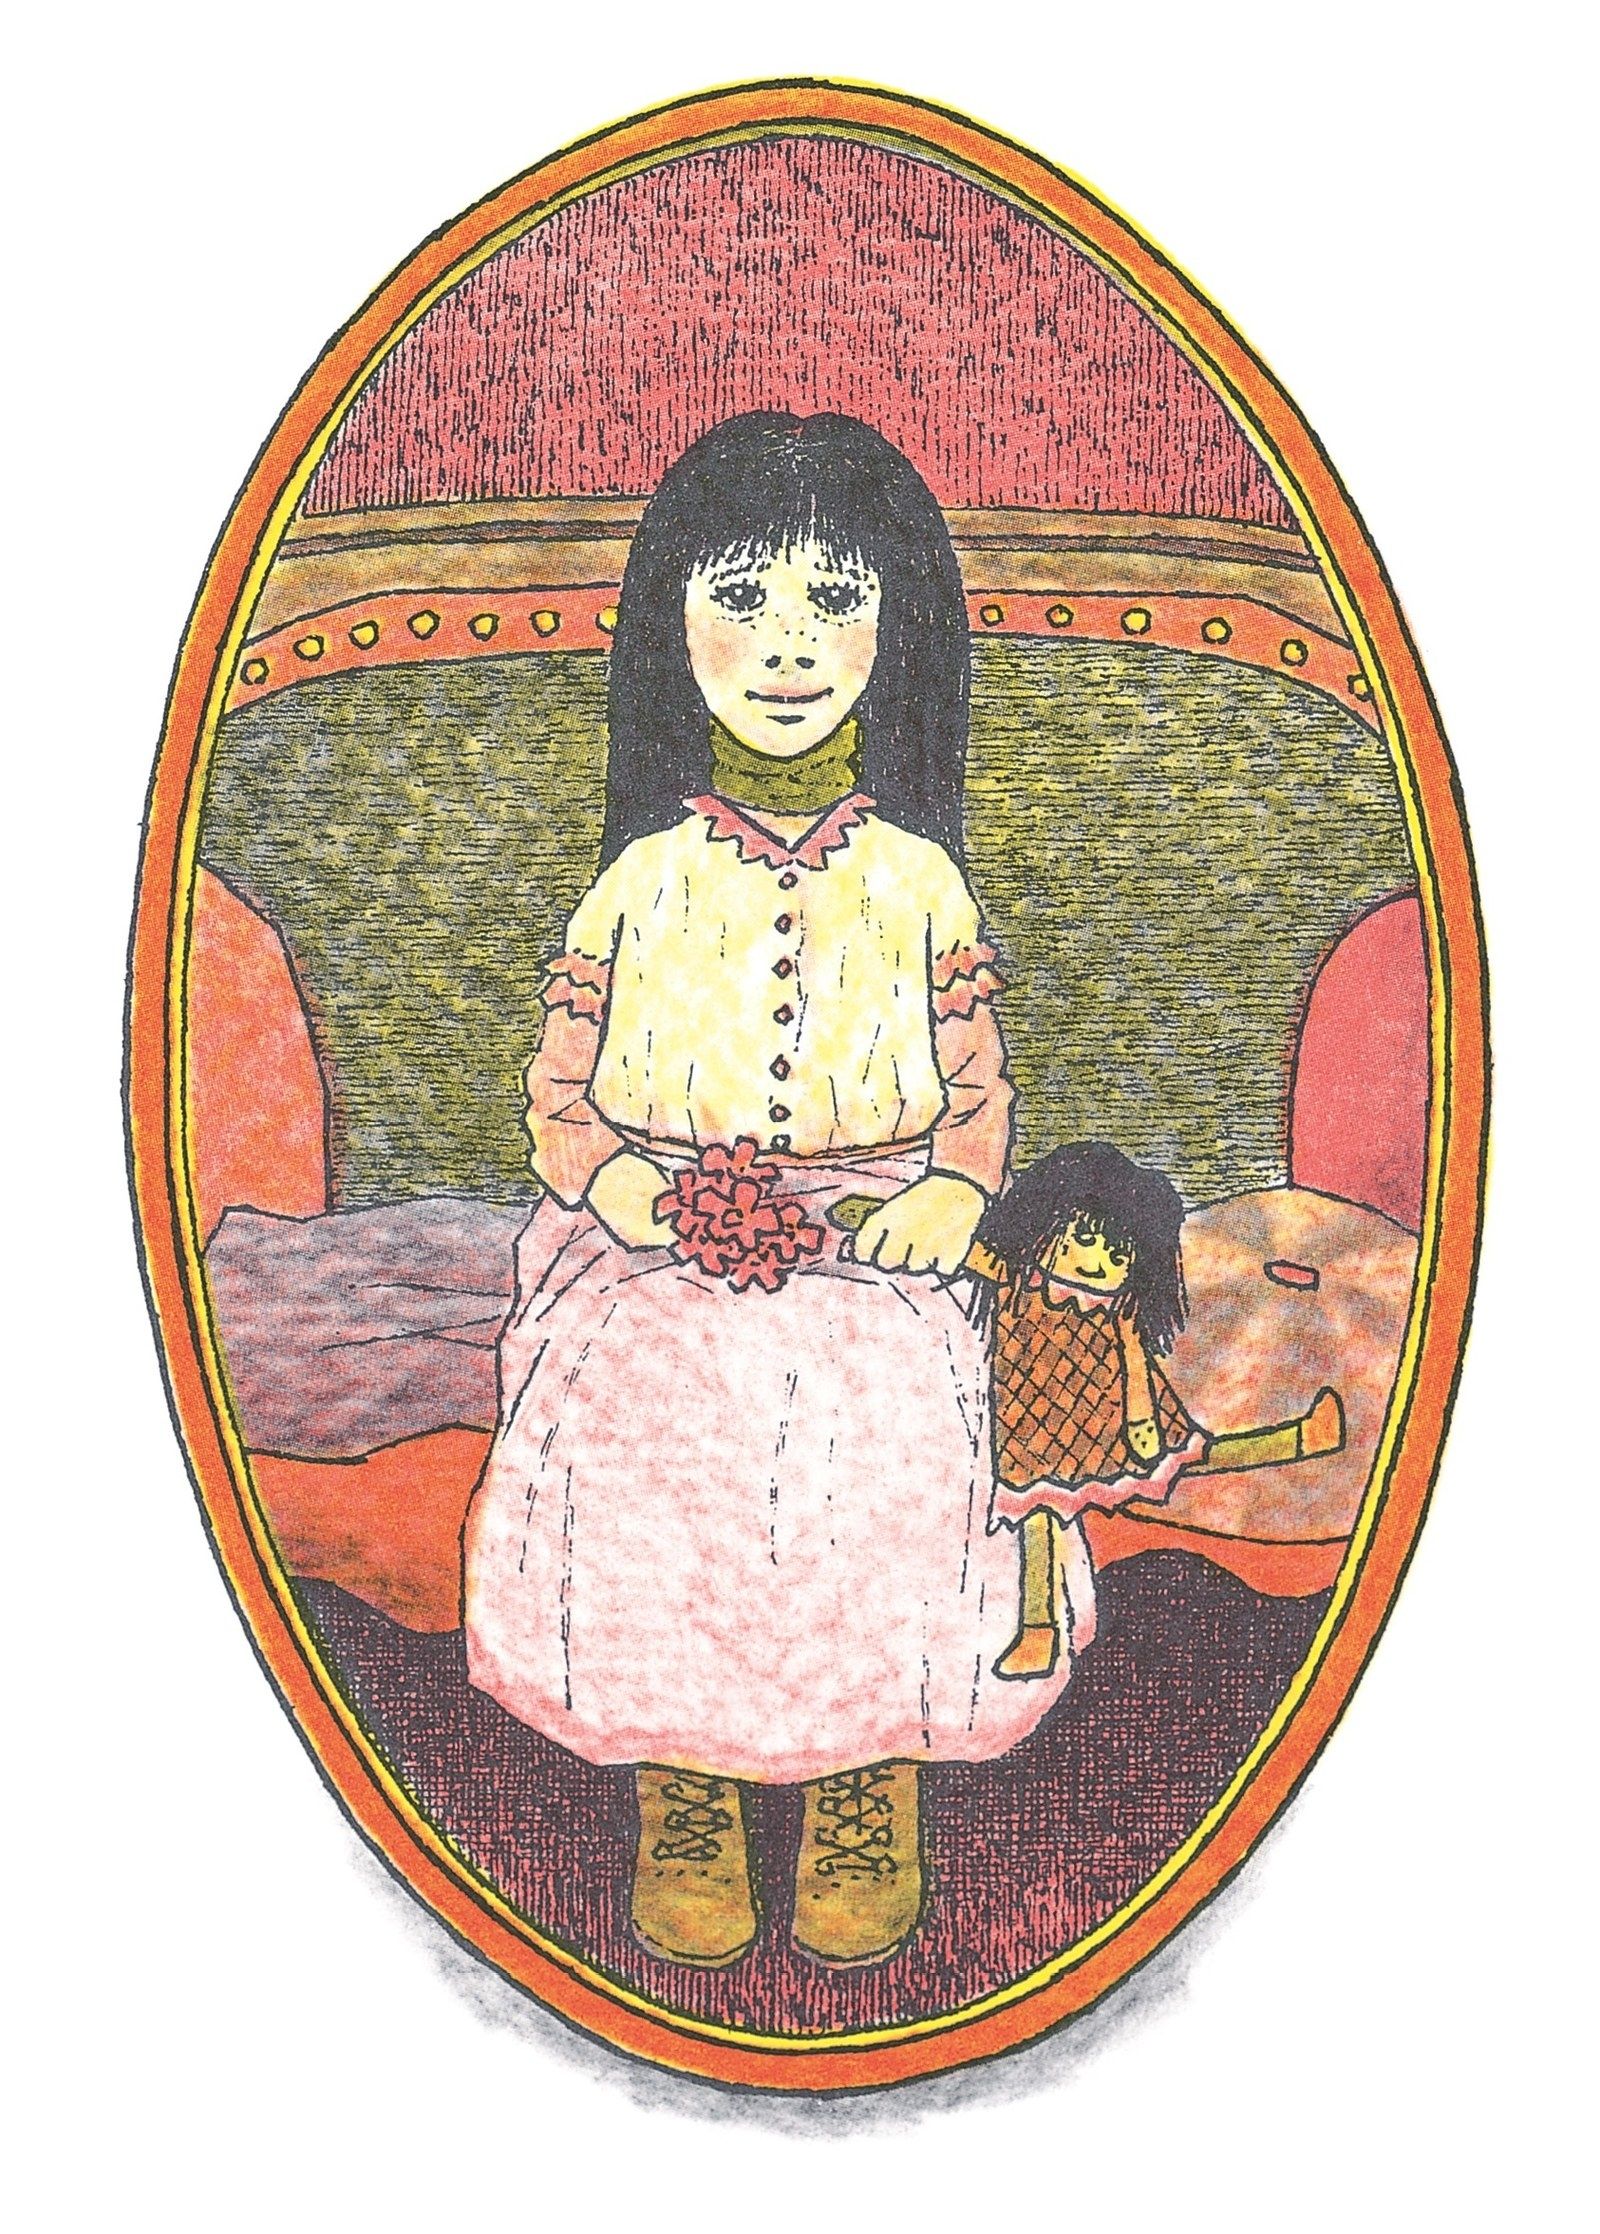 image from the story "the green ribbon" by Alvin Schwartz. It features a girl with white skin and dark hair in a long dress, along with a green ribbon around her neck. 